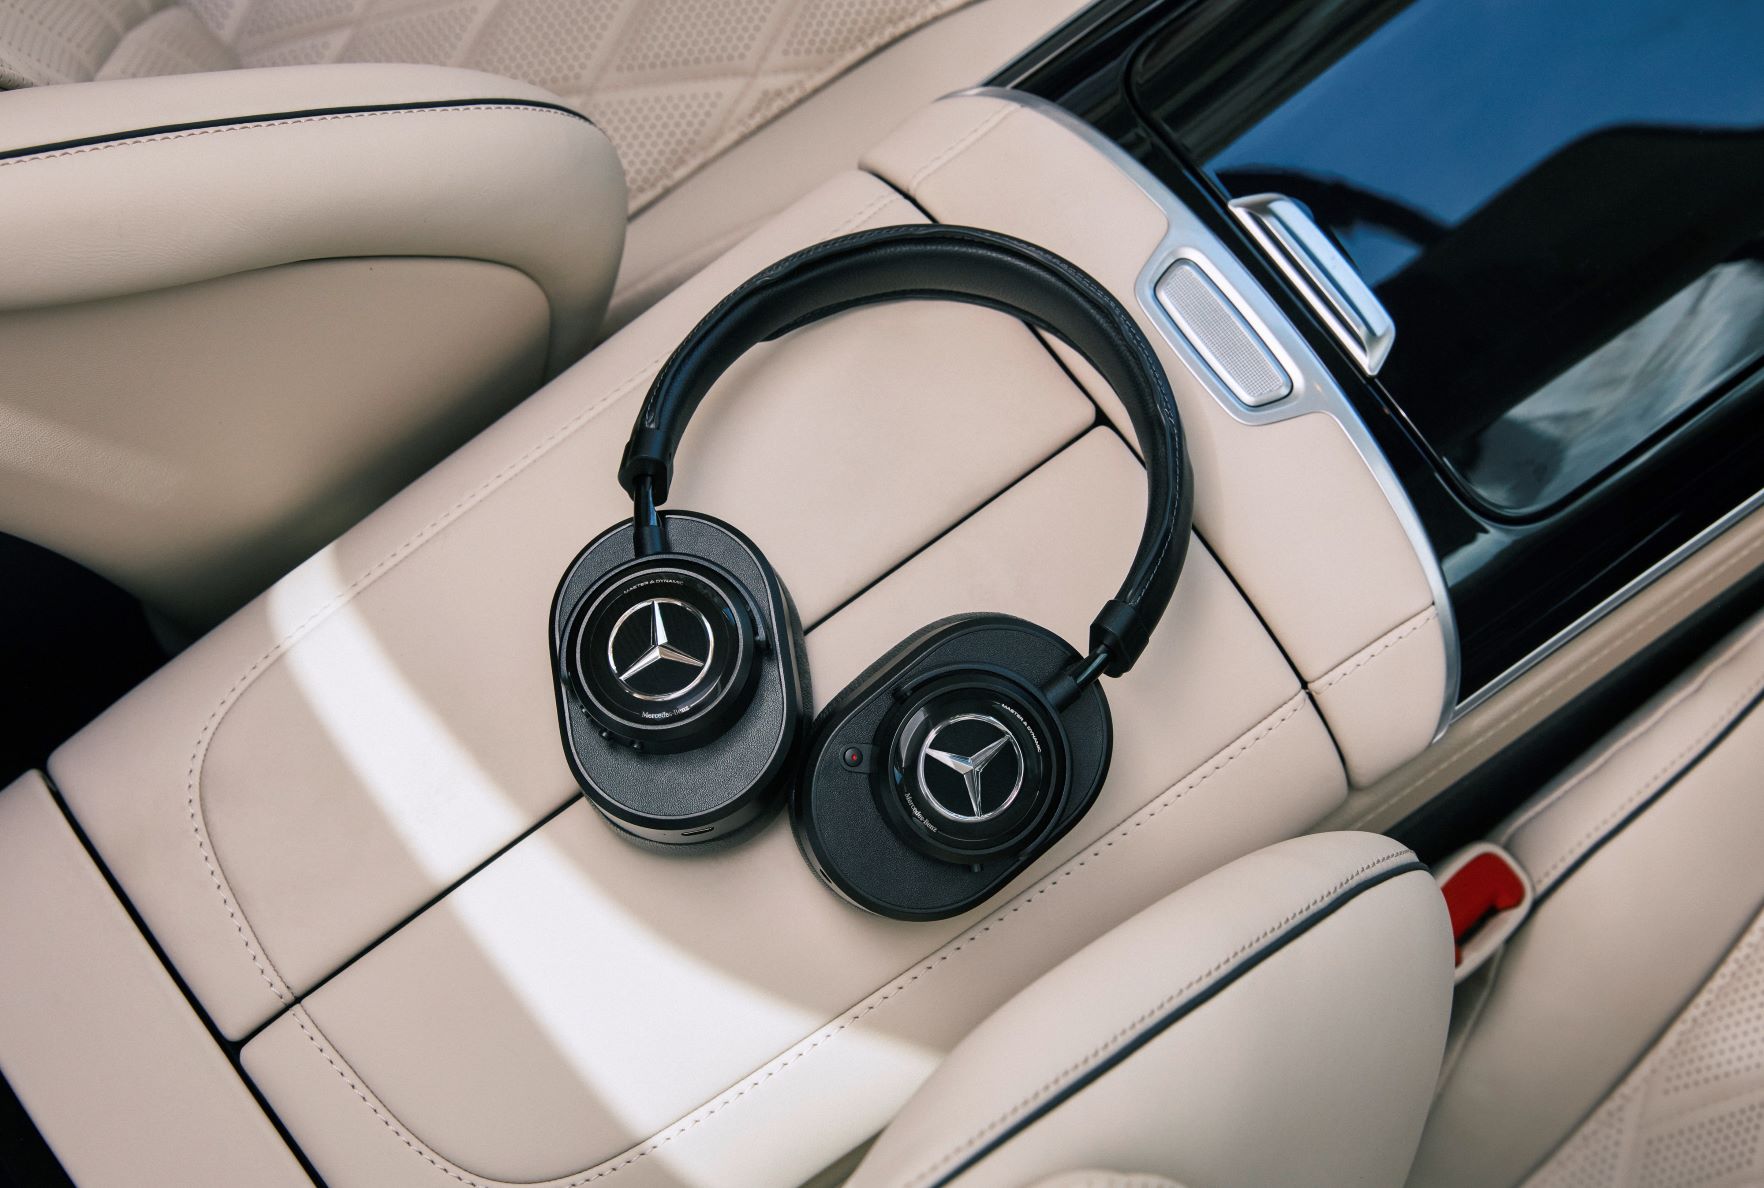 Mercedes-Benz and Master & Dynamic headphones